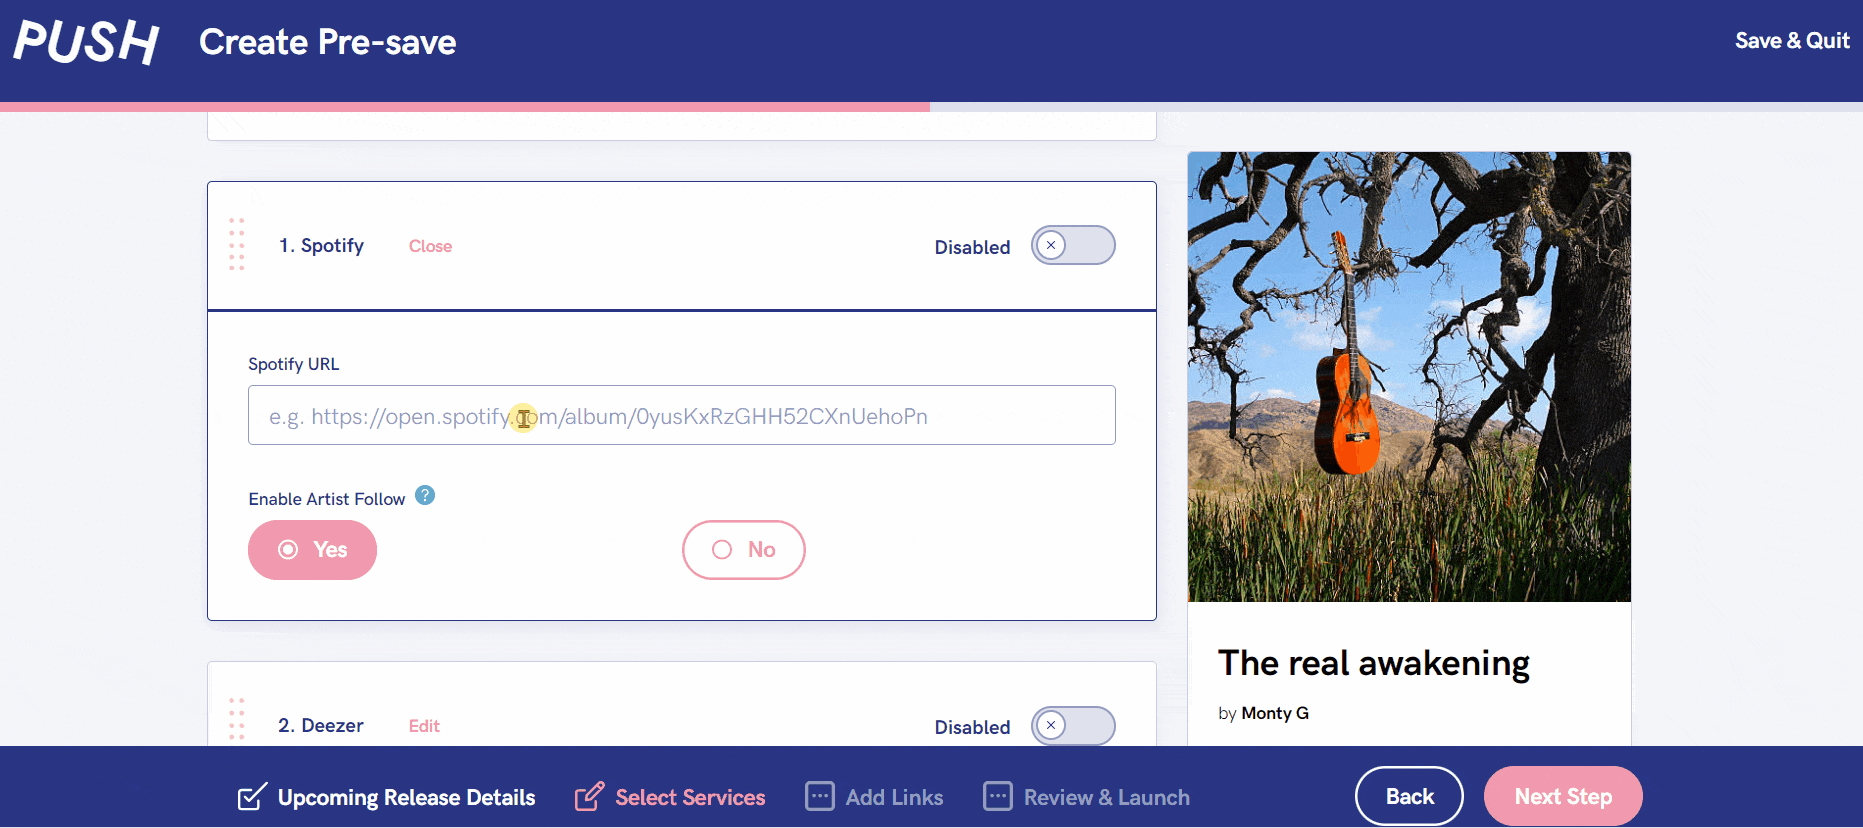 How to make a quick Pre-save to promote your music. 

GIF showing the creation process